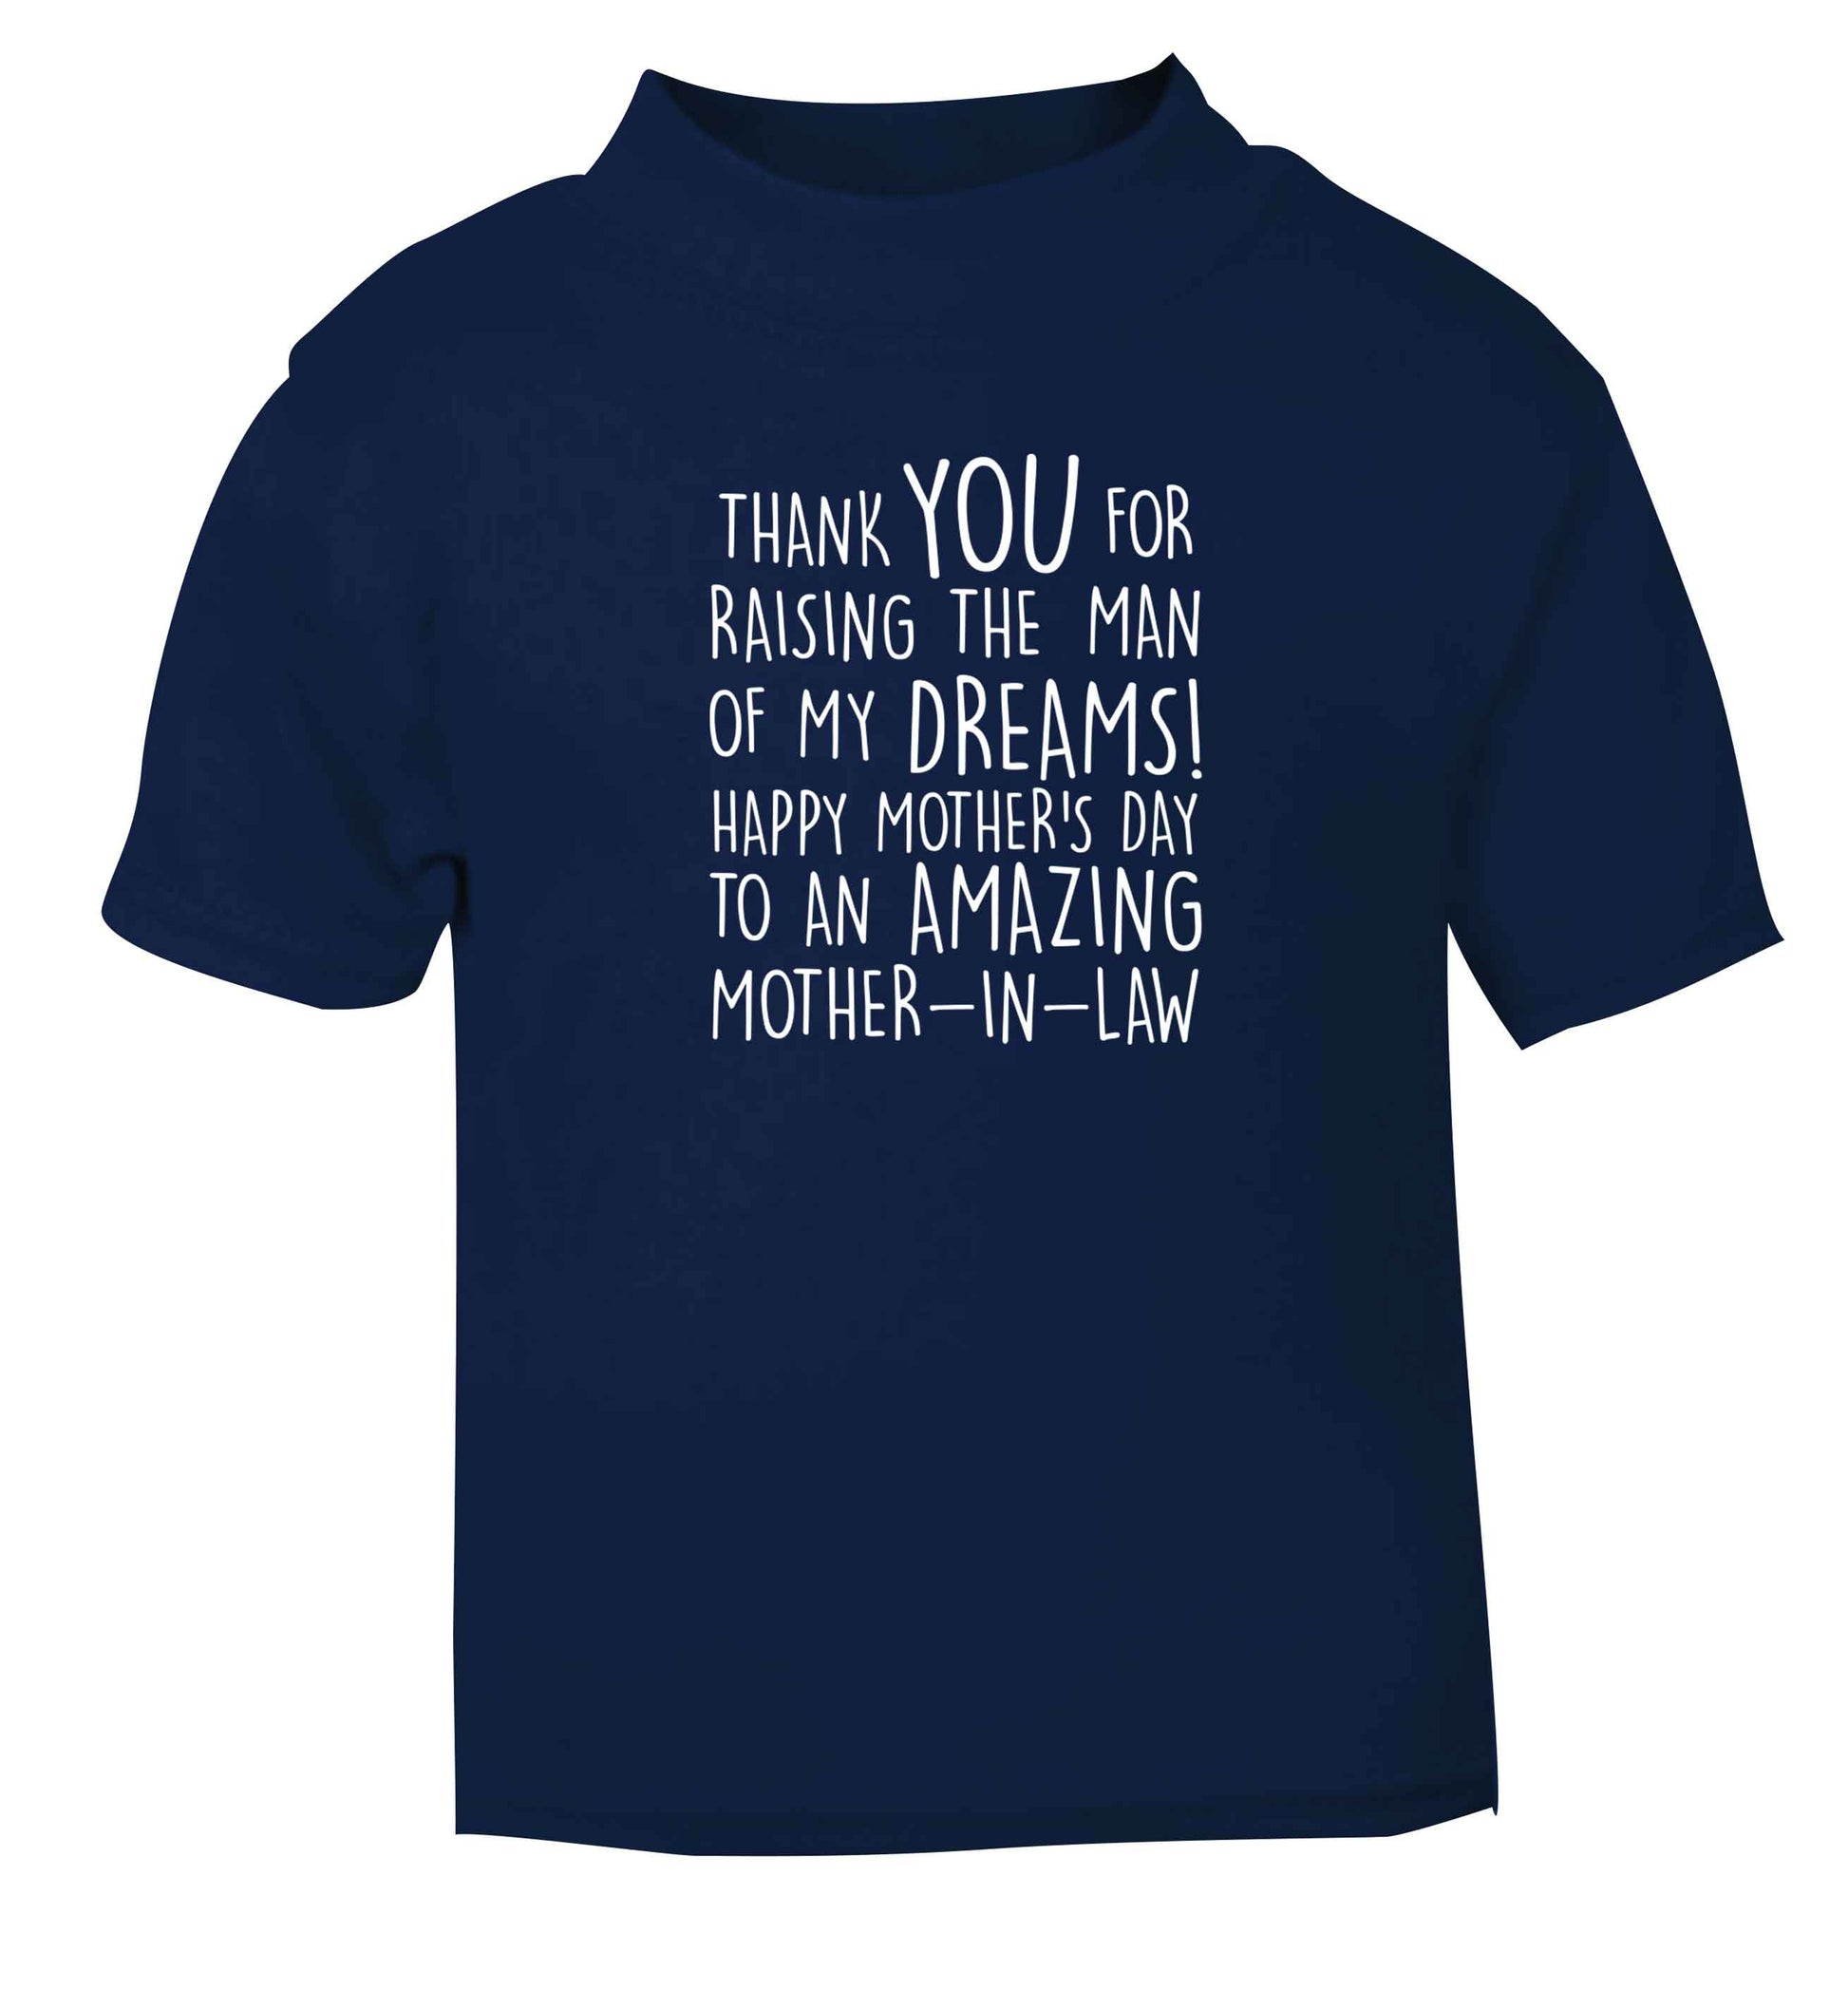 Raising the man of my dreams mother's day mother-in-law navy baby toddler Tshirt 2 Years